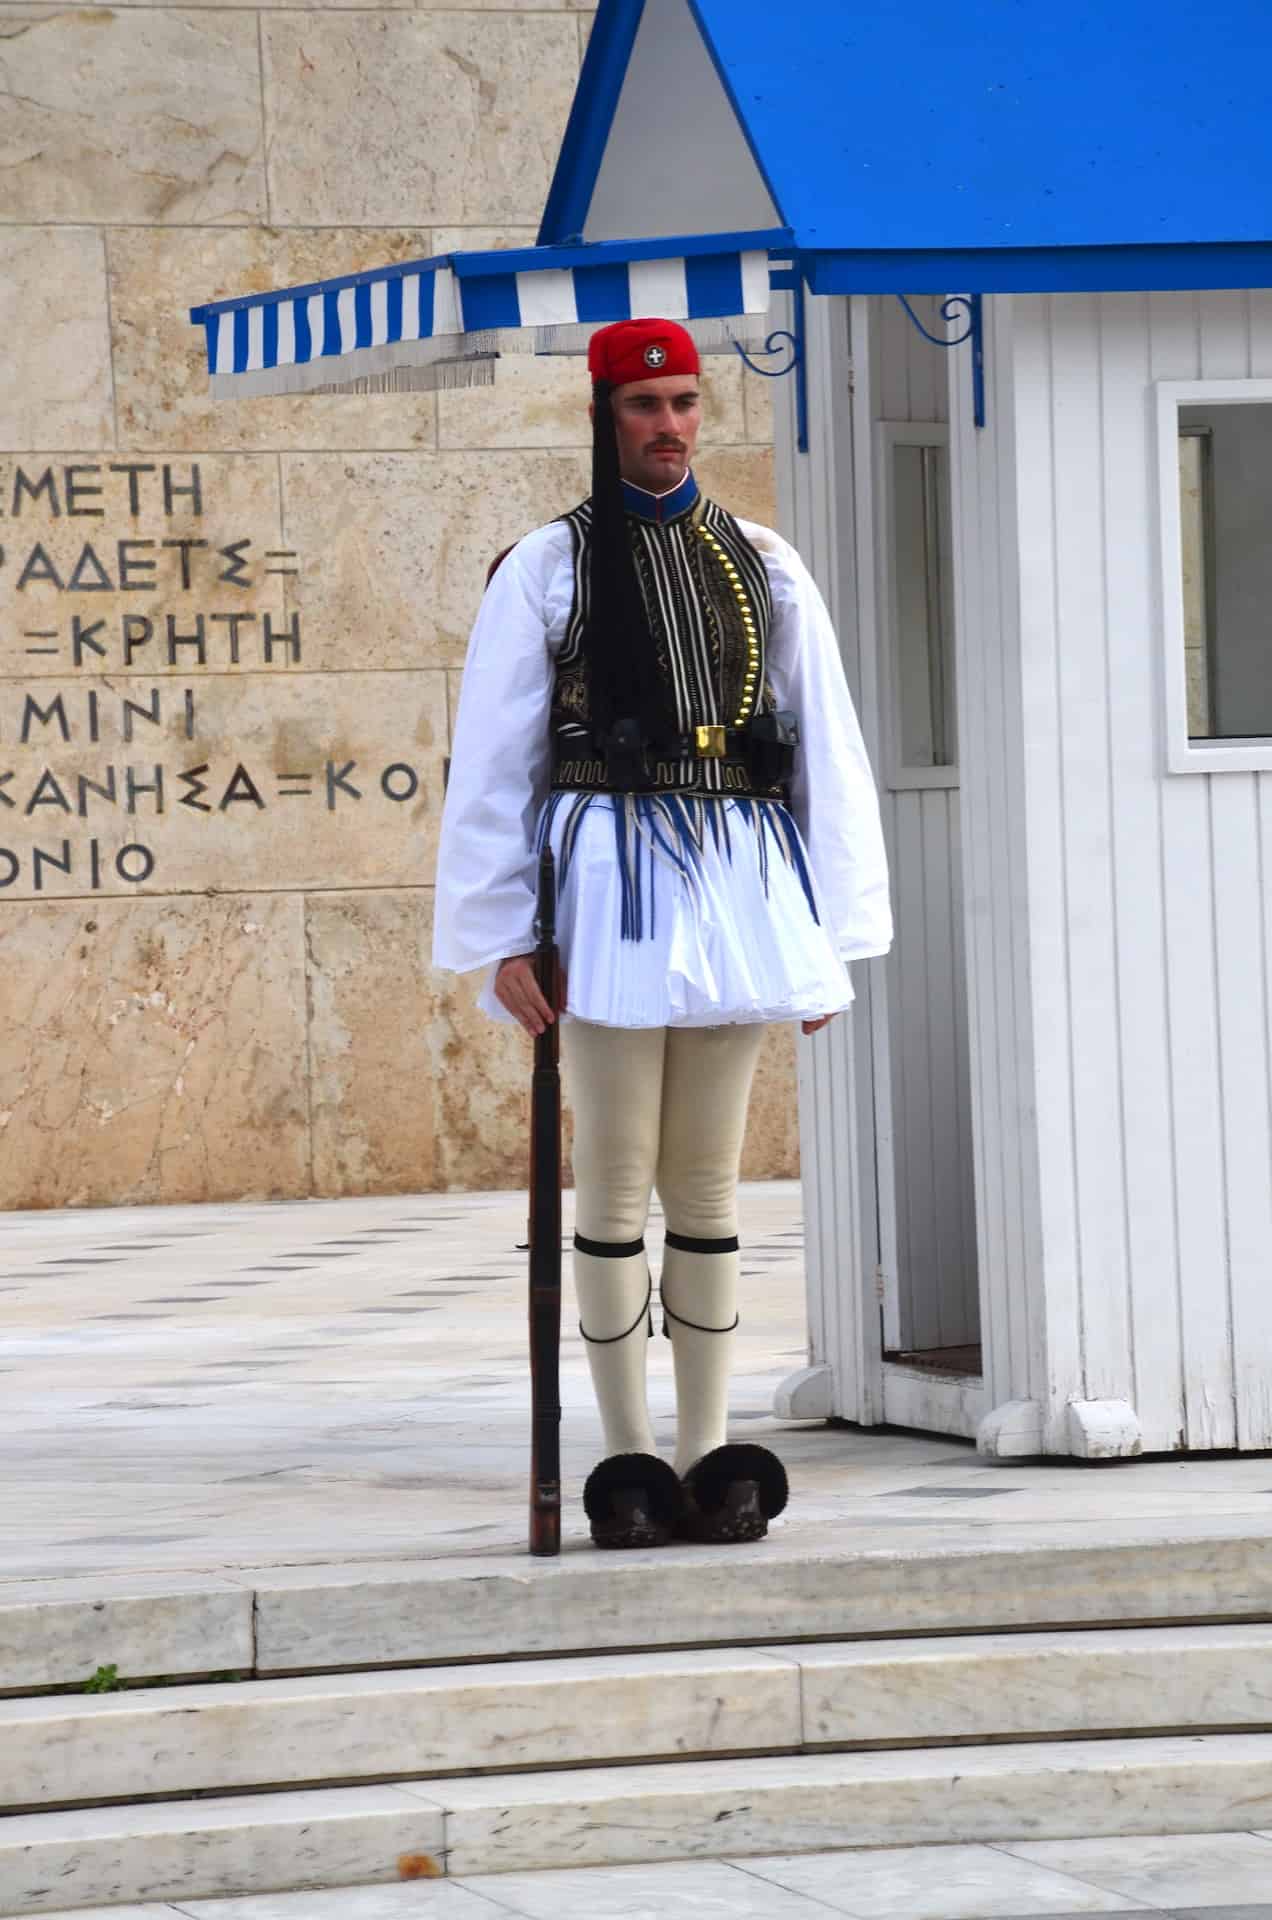 An Evzone in his formal Sunday uniform at the Tomb of the Unknown Soldier in Athens, Greece